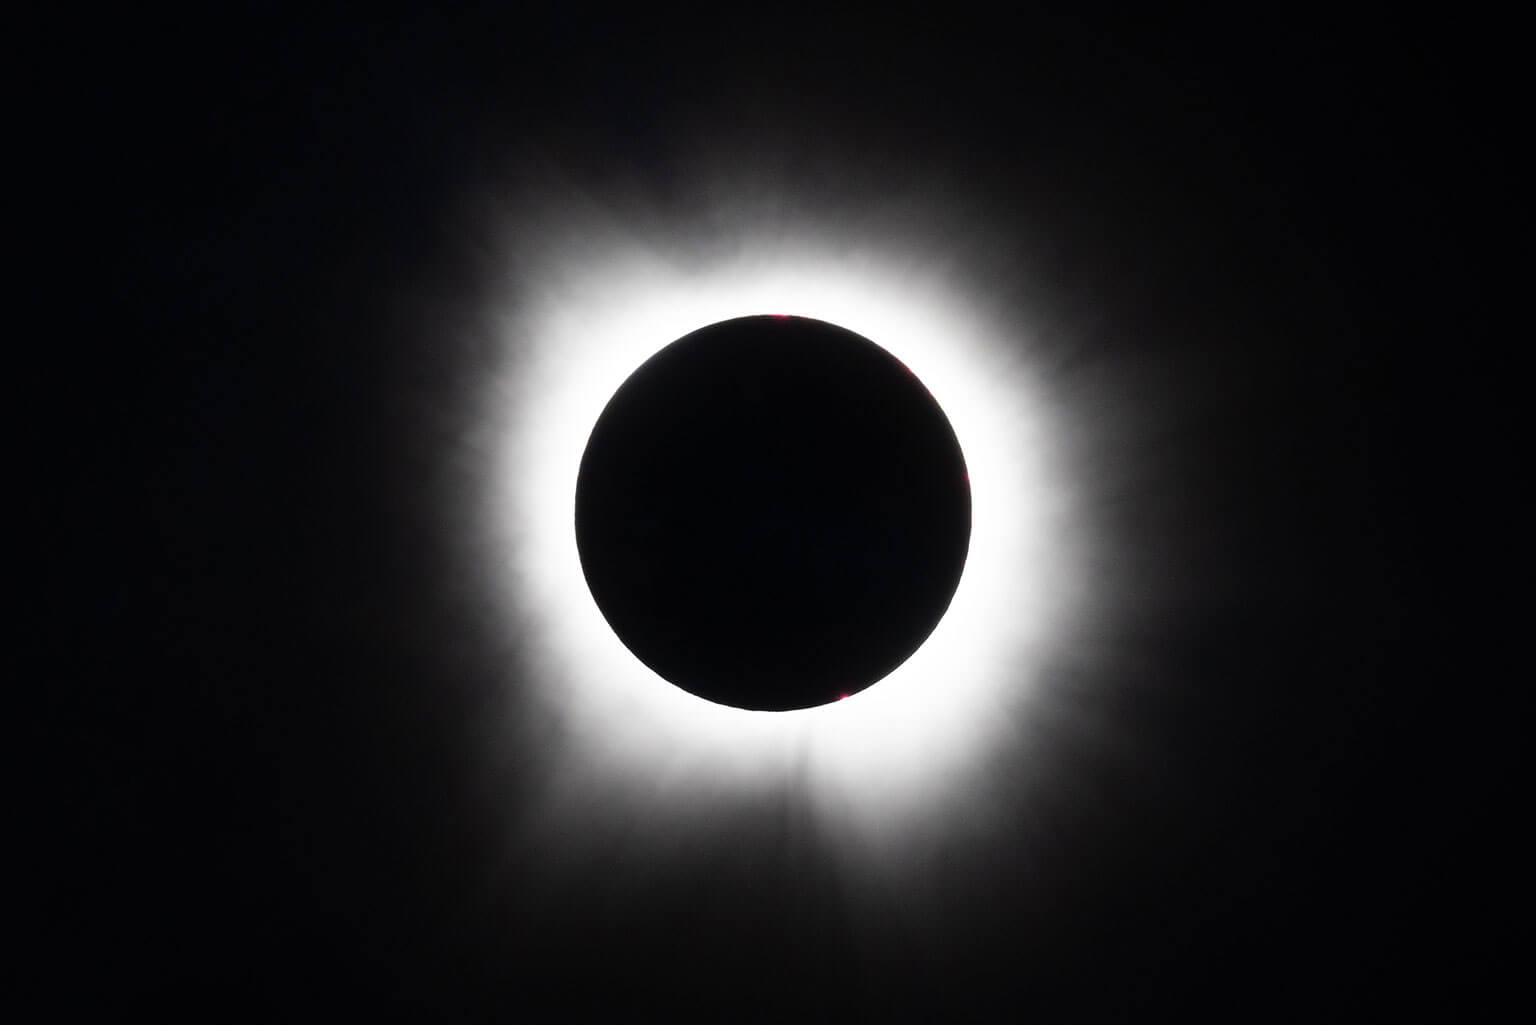 The full total solar eclipse is shown in Texas.